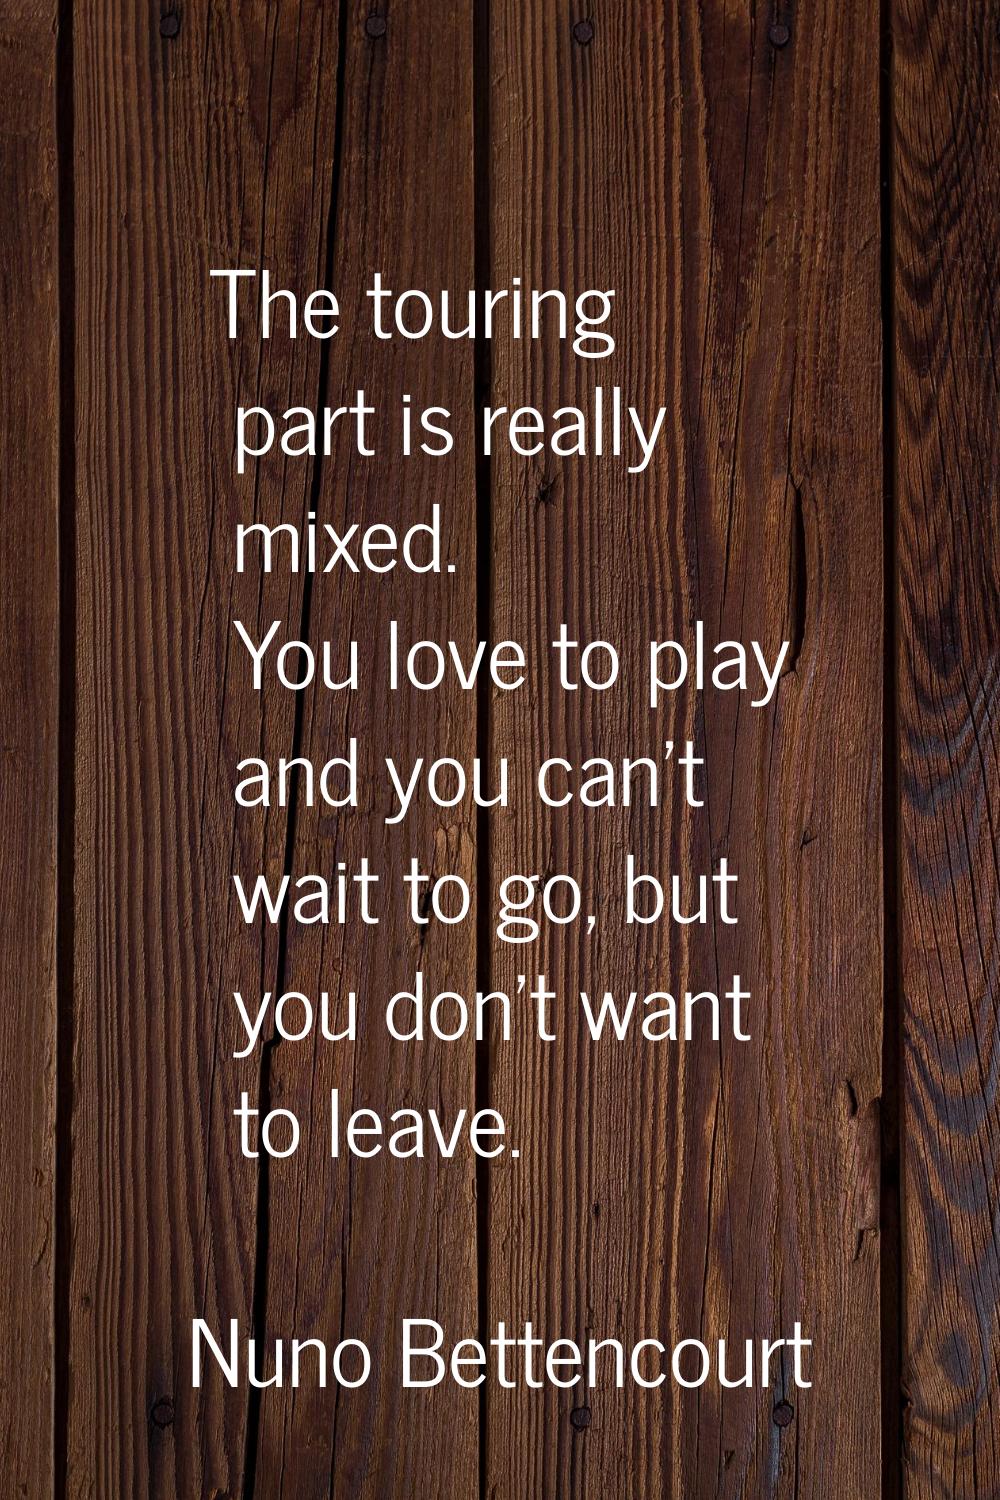 The touring part is really mixed. You love to play and you can't wait to go, but you don't want to 